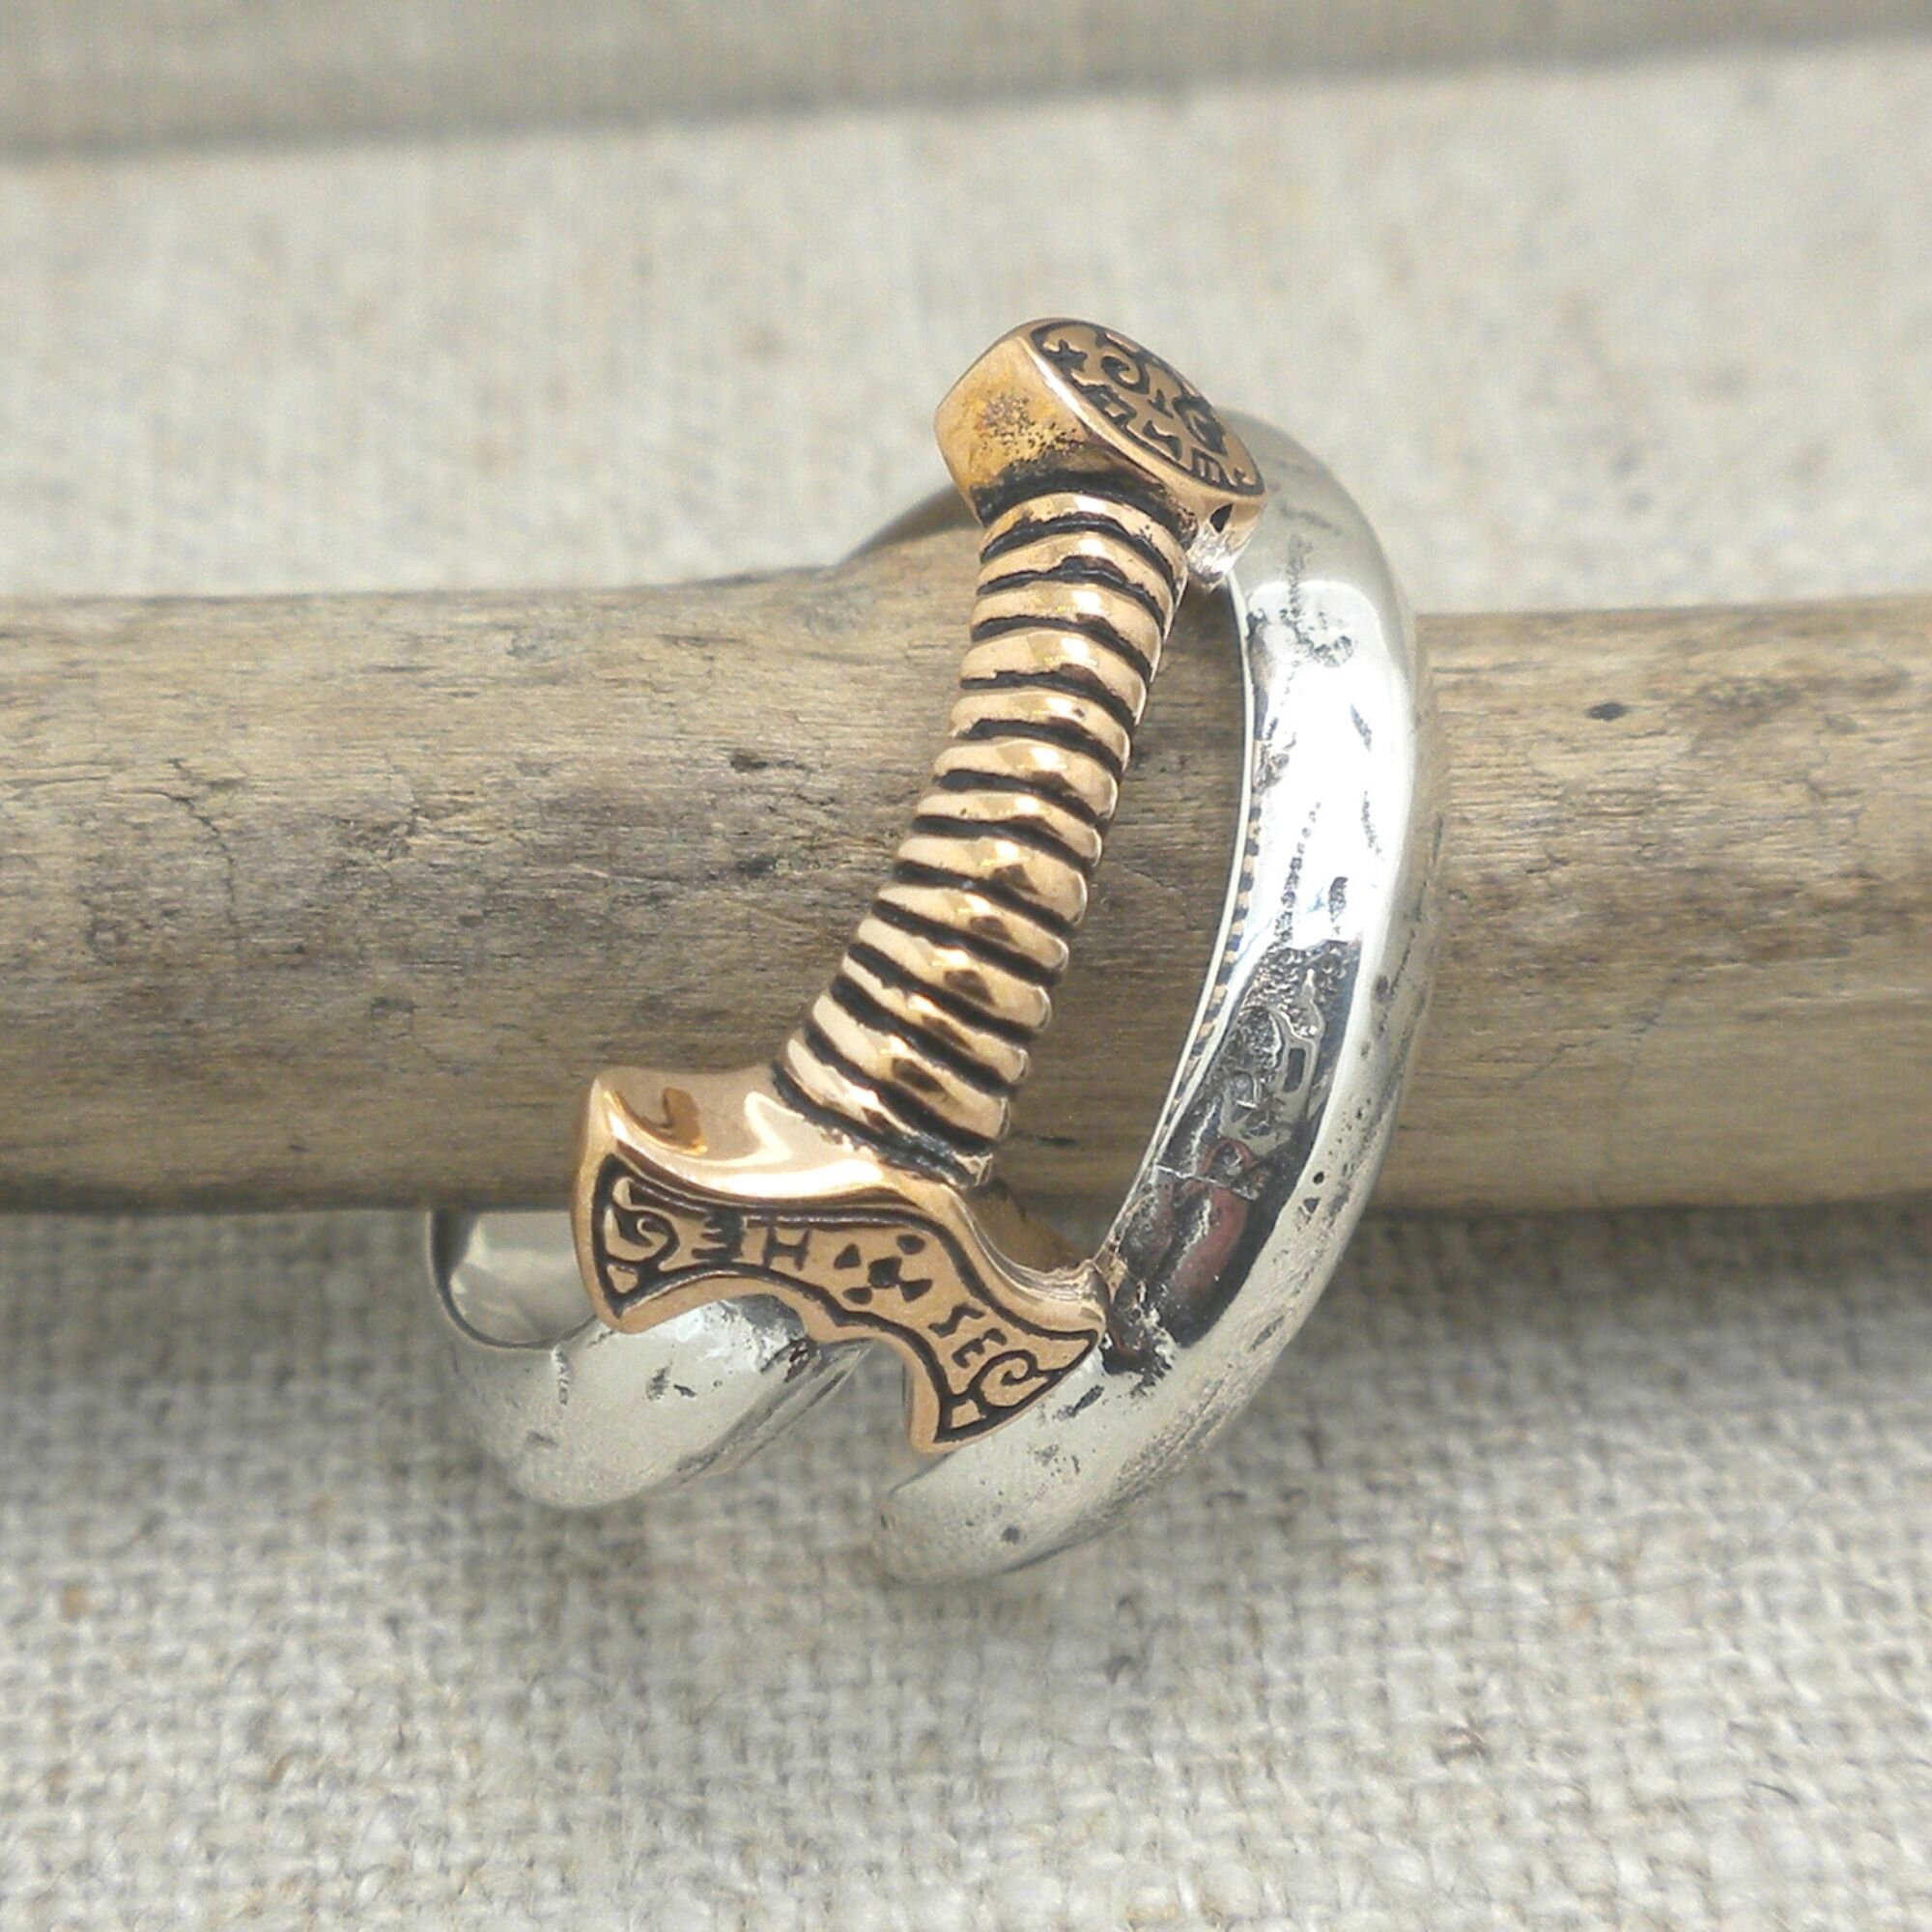 Petrichor Sword Ring by Keith Jack